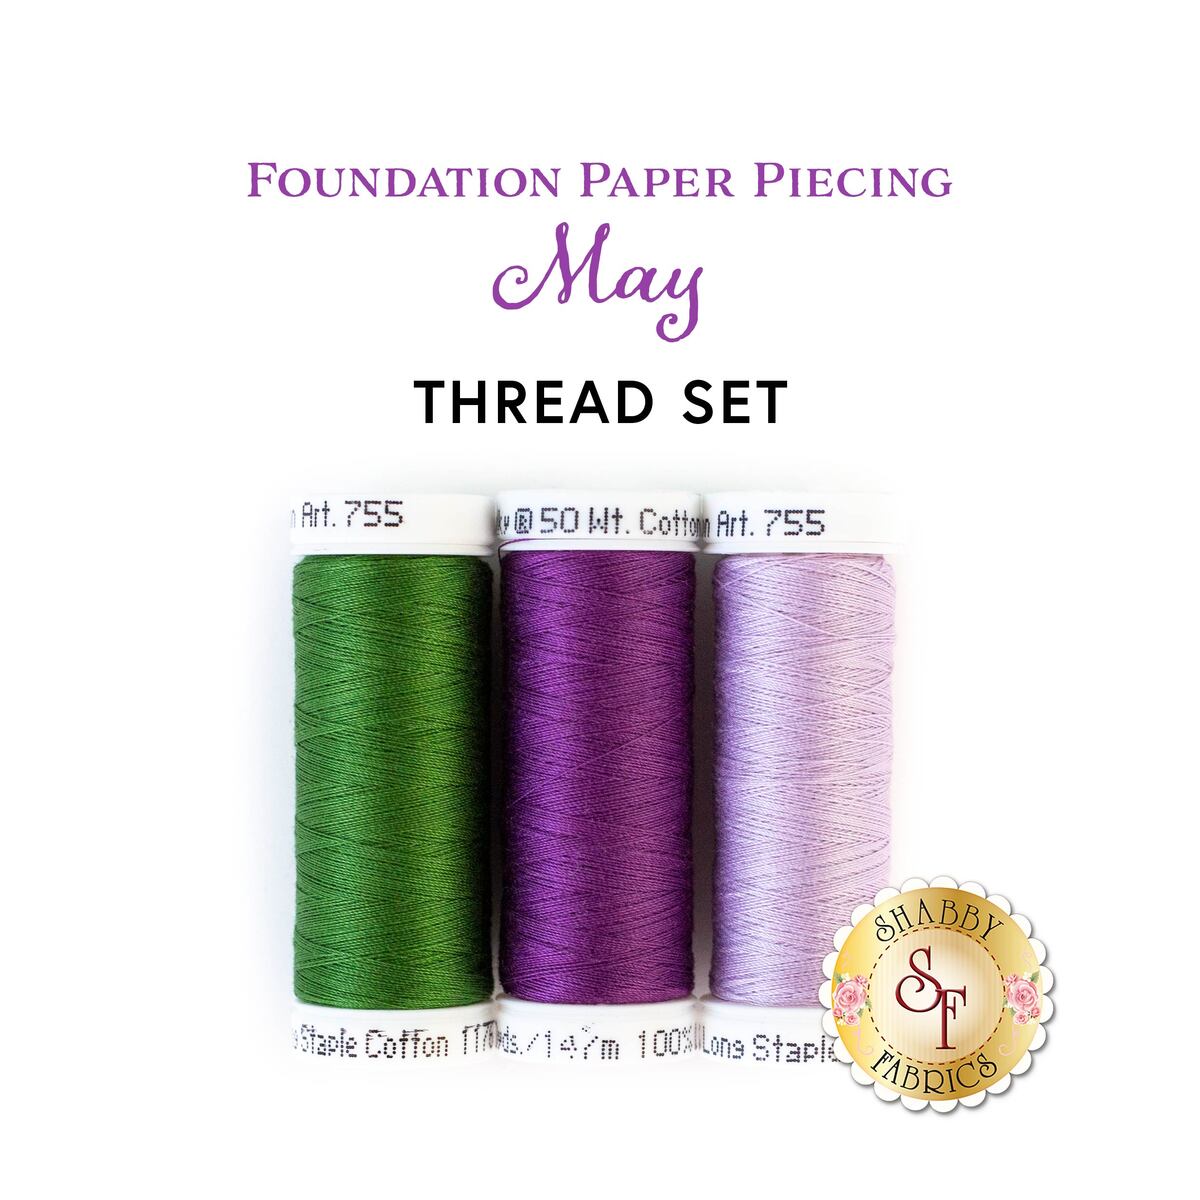 NEX Sewing Thread Assortment Cotton Spools Thread Set for Sewing